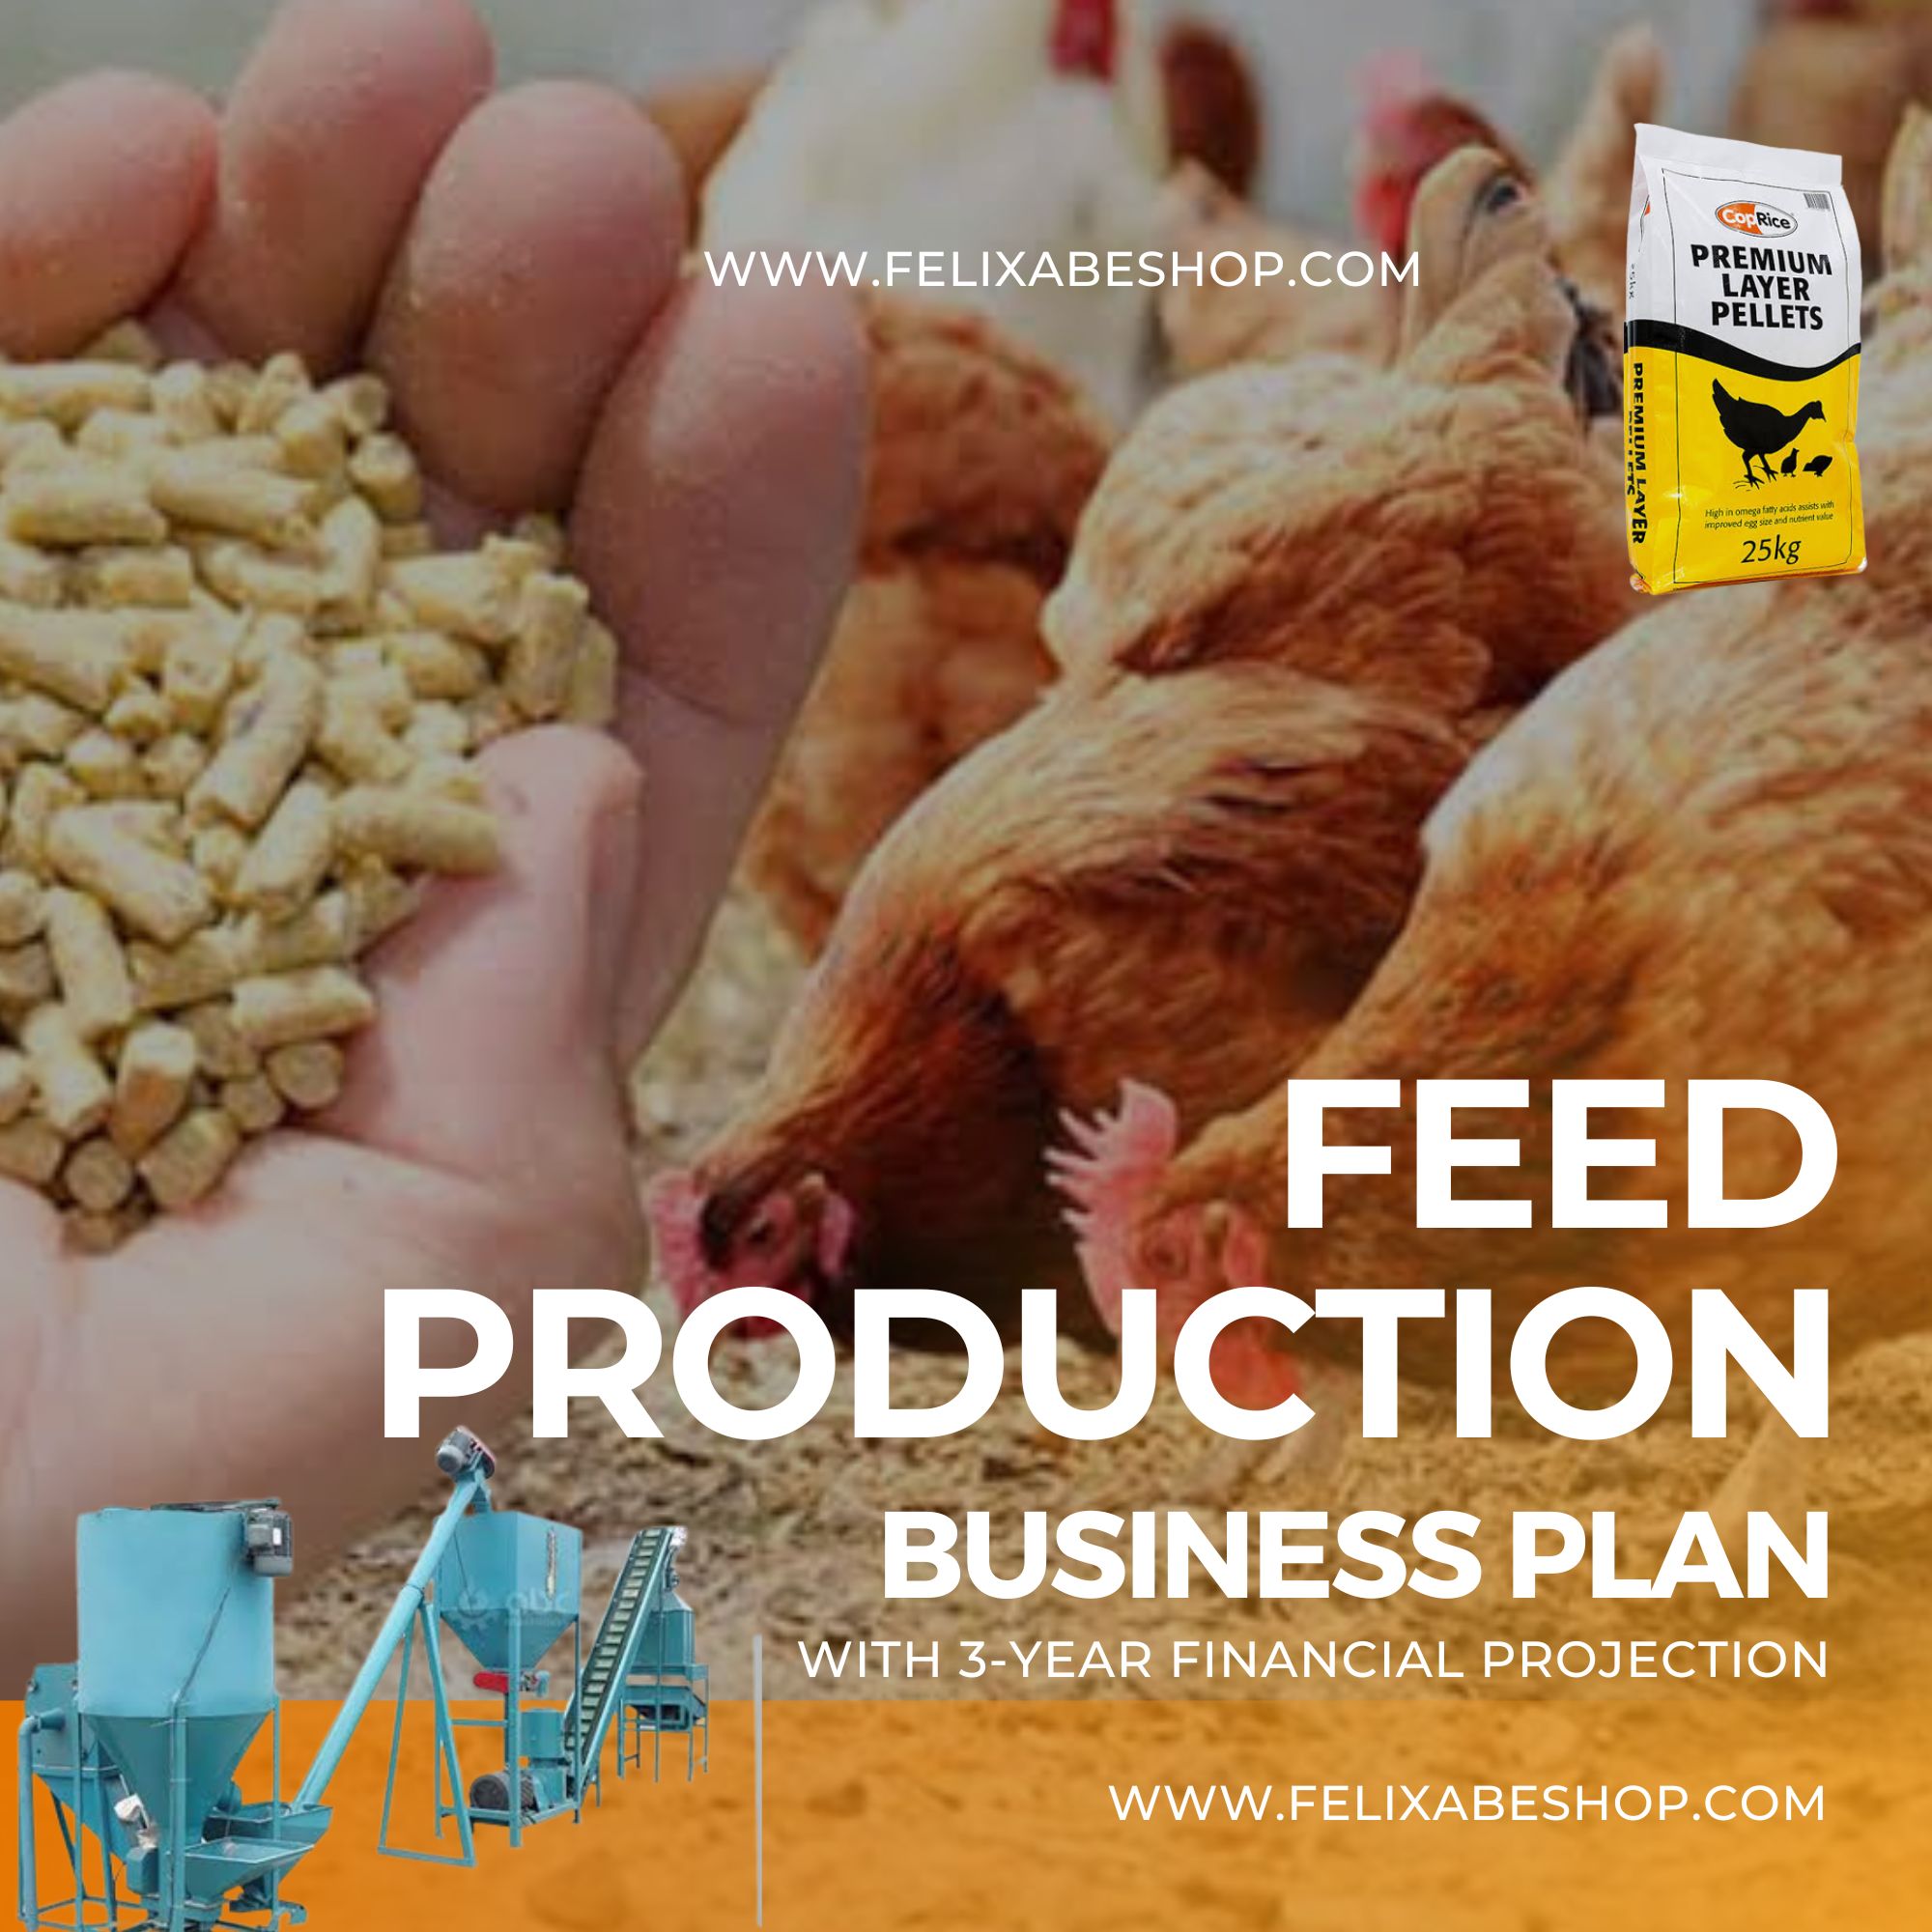 FEED PRODUCTION BUSINESS PLAN